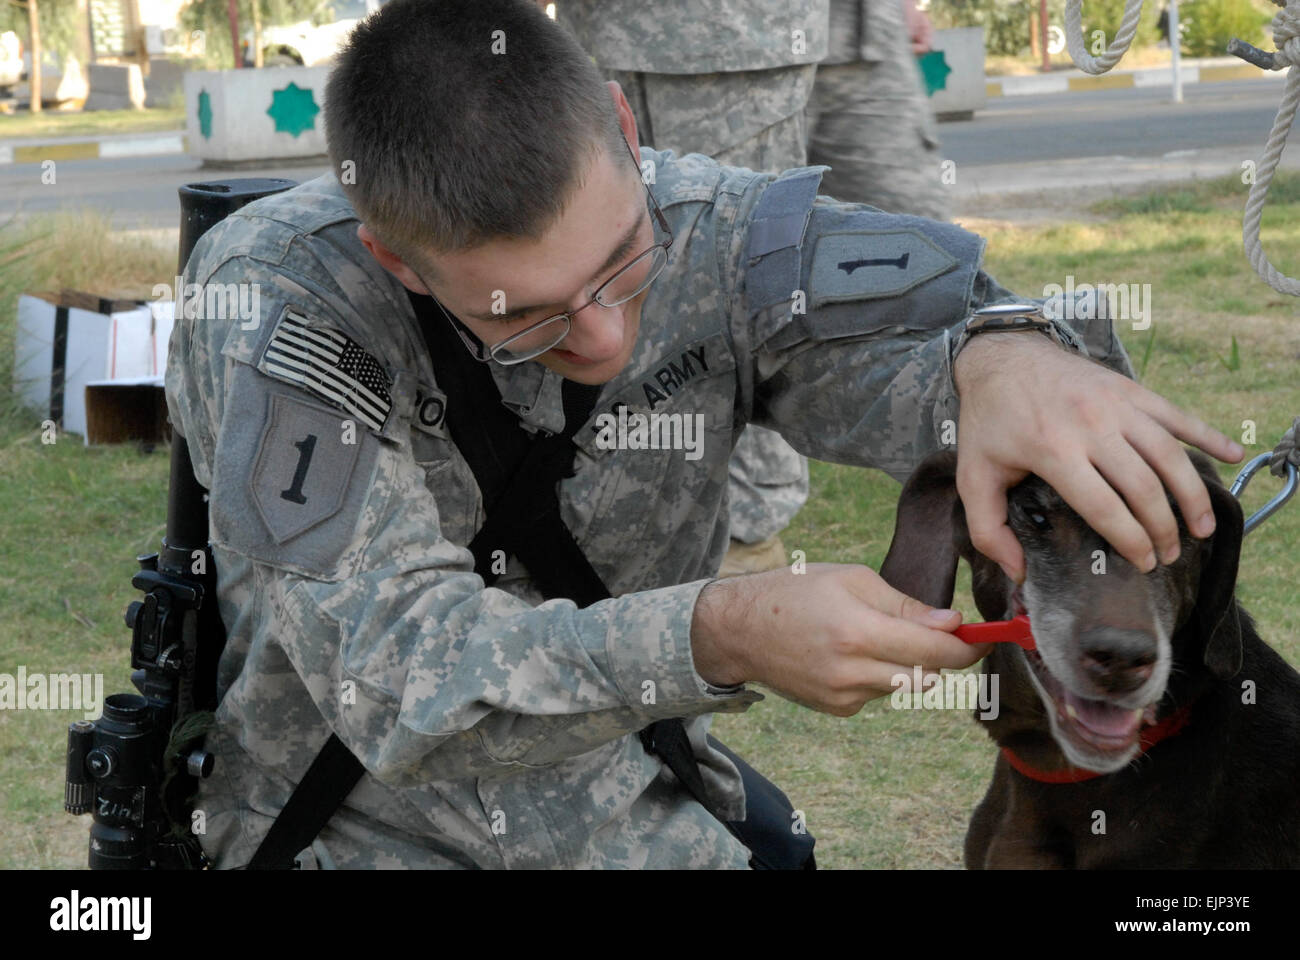 Spc. Ruben Pop, a medic with Company C, Special Troops Battalion, 2nd Advise and Assist Brigade, 1st Infantry Division, United States Division – Center and a Houston native, brushes the teeth of Timer, a working dog with the 11th Iraqi Army Division. Joey and three other working dogs were inherited by the 11th IA Div. from a contracting firm and are now being re-trained by Dagger Brigade Soldiers to work with 11th IA Div. handlers to detect explosive devices.  Sgt. Daniel Stoutamire, 2nd AAB, 1st Inf. Div., USD-C Stock Photo